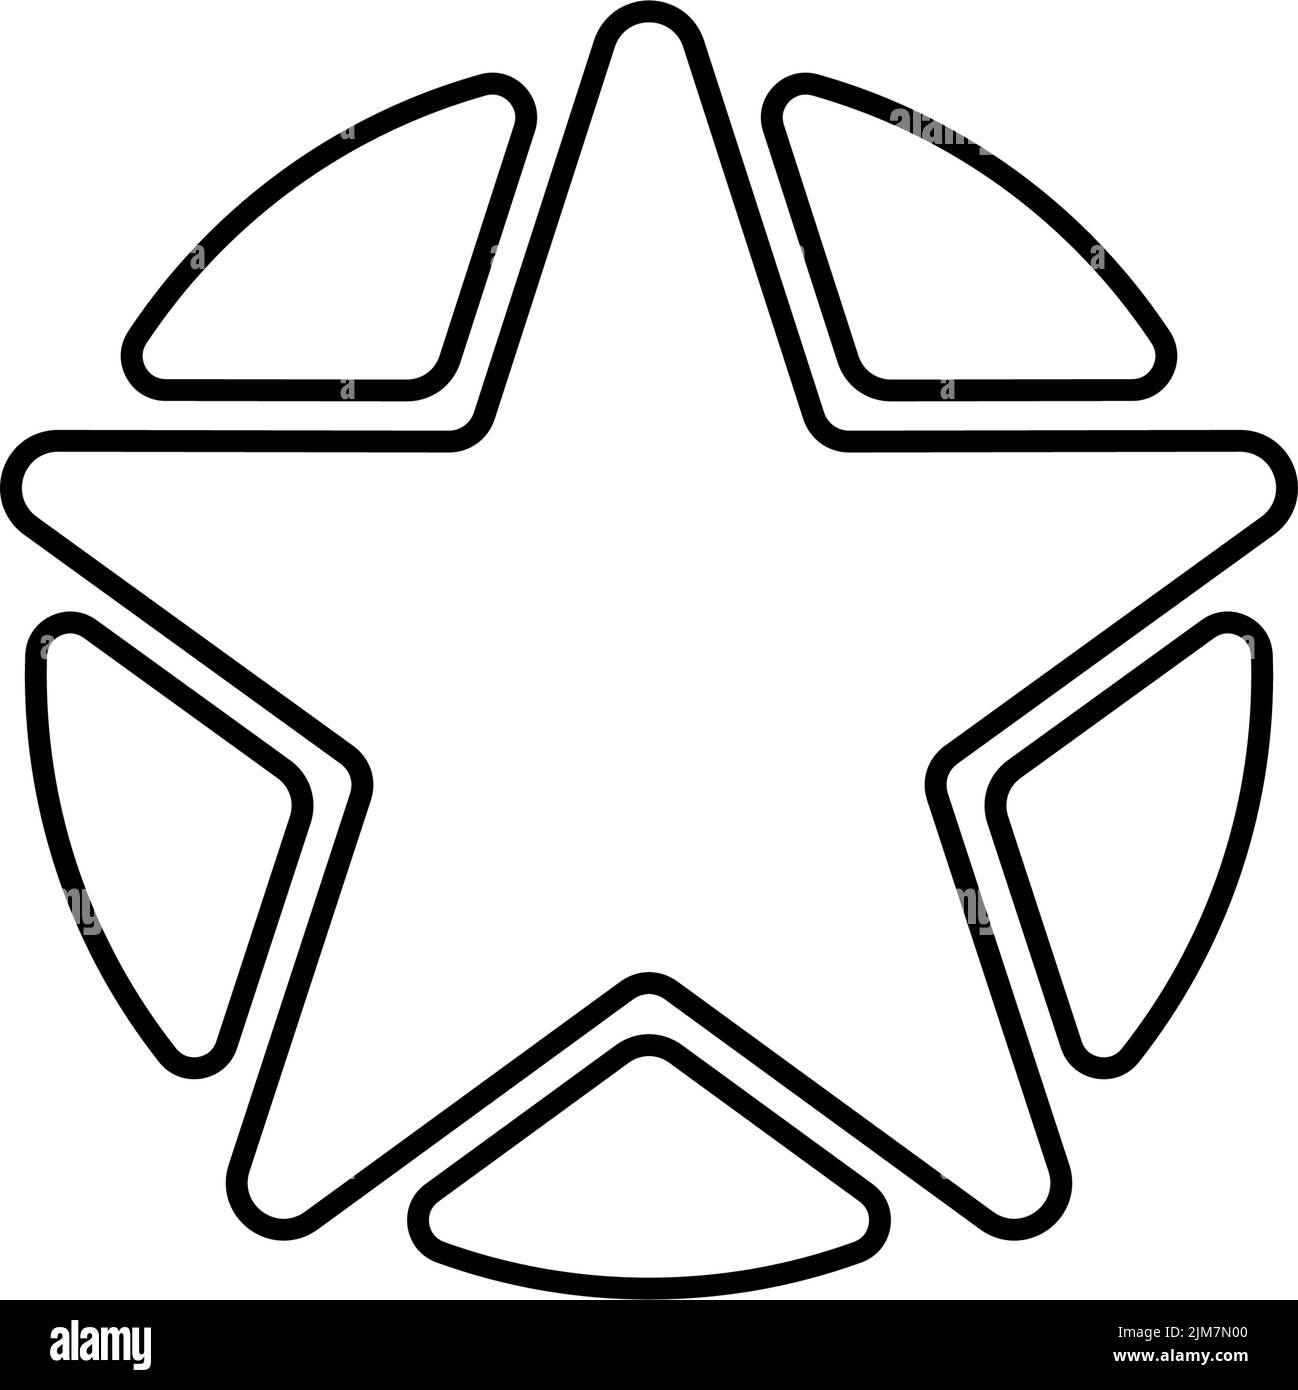 The monochrome star sign and triangles with white background Stock Vector